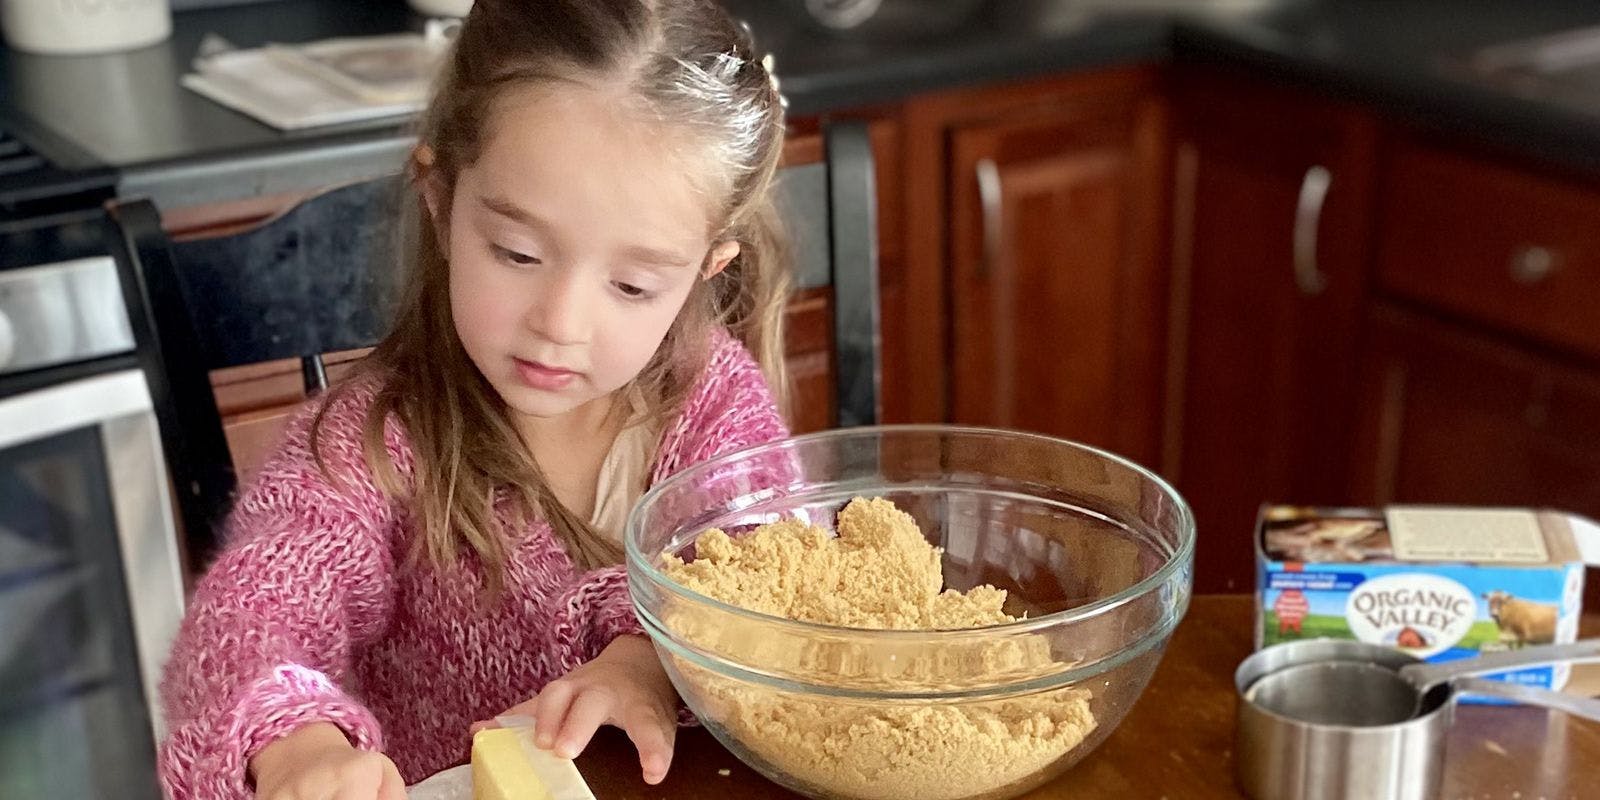 Young girl adds Organic Valley butter to the bowl. Contributed by Jackie Thesing.